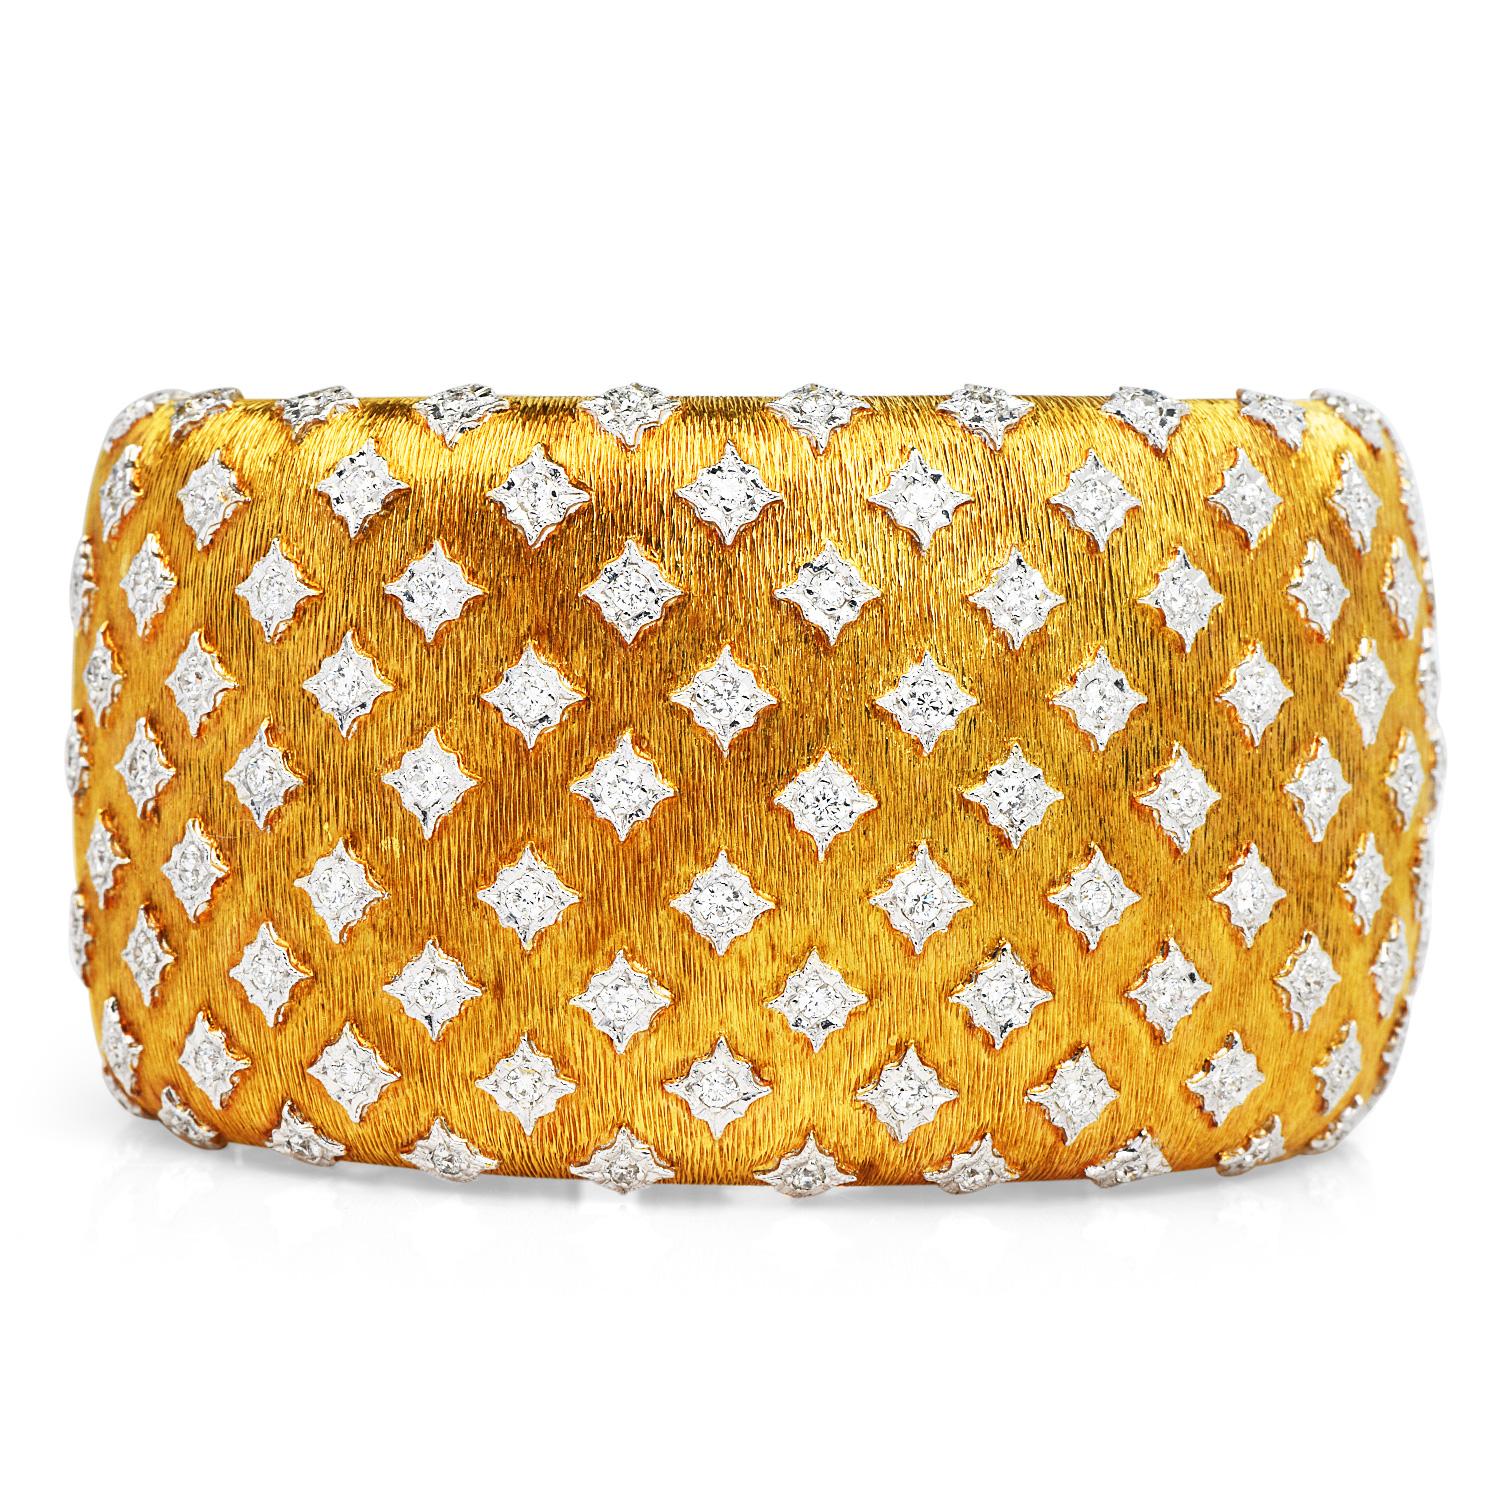 A magnificent wide cuff bracelet, with timeless elegance, and a royalty Inspired look, is definitely the perfect accessory for every evening dress.

Crafted in solid 18K yellow gold, featuring the Rigato effect characteristic of many Italian jewelry